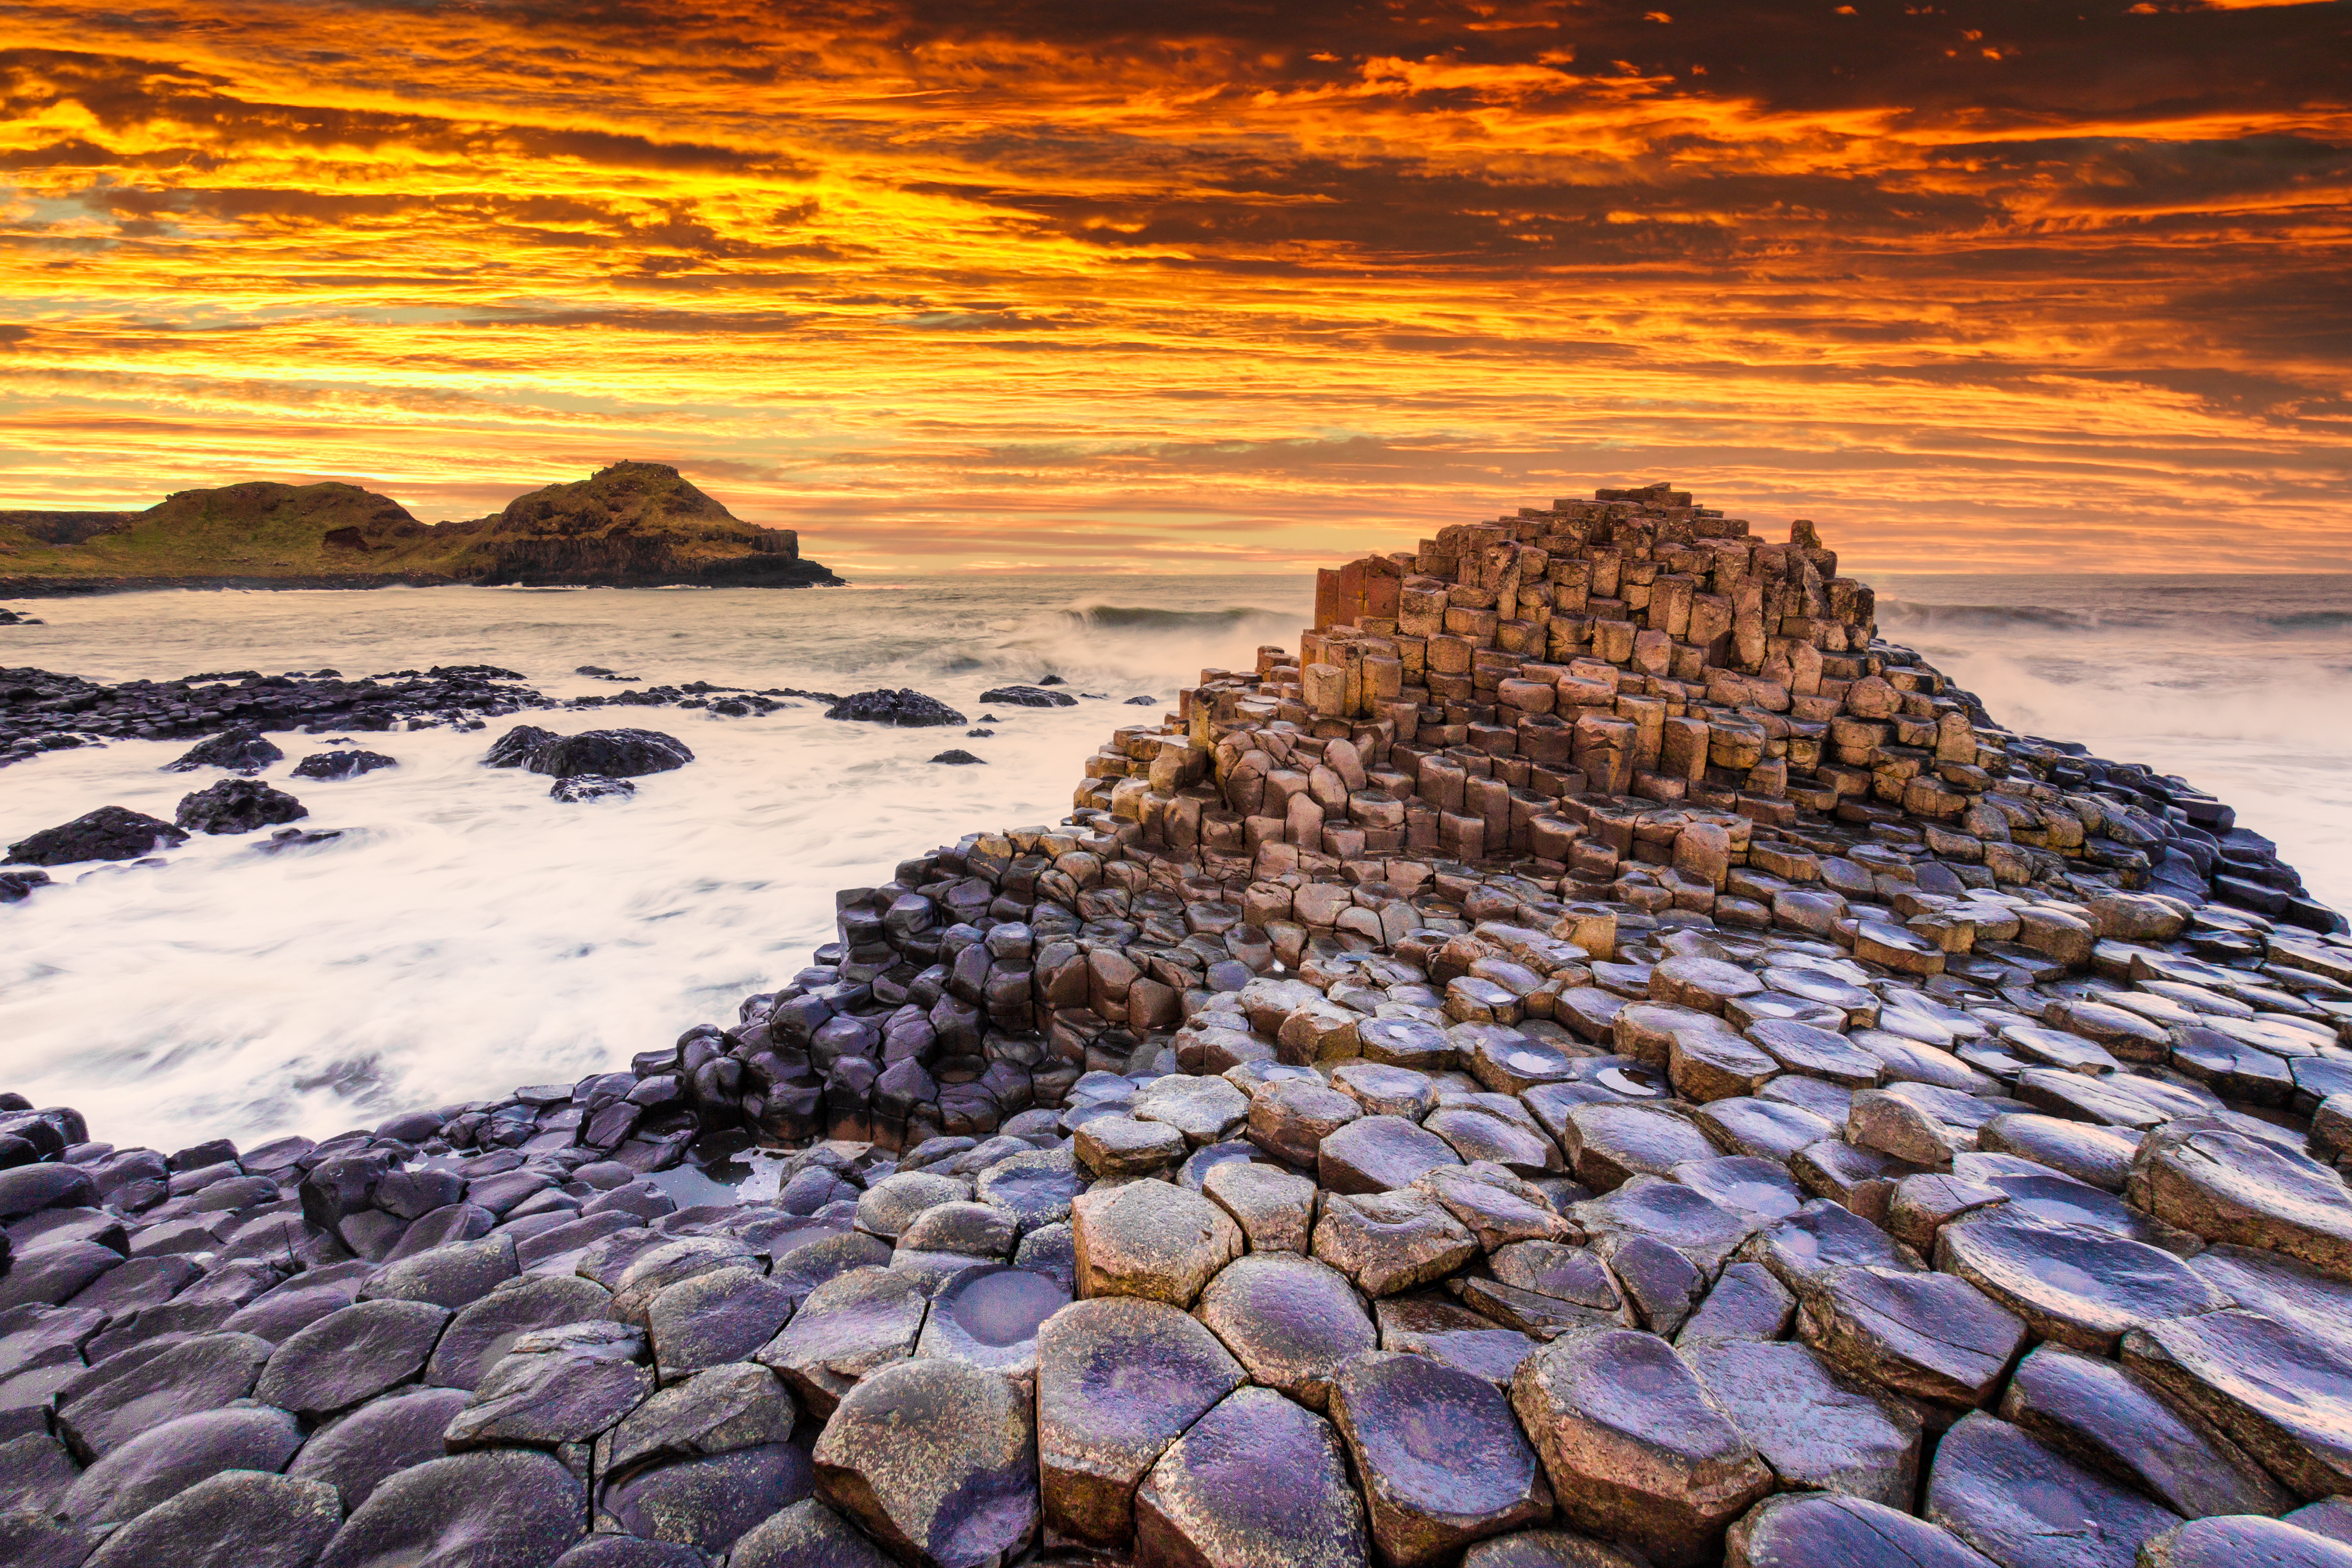 Must See European Natural Wonders to Check Out During a Family Vacation - Giant's Causeway in Ireland